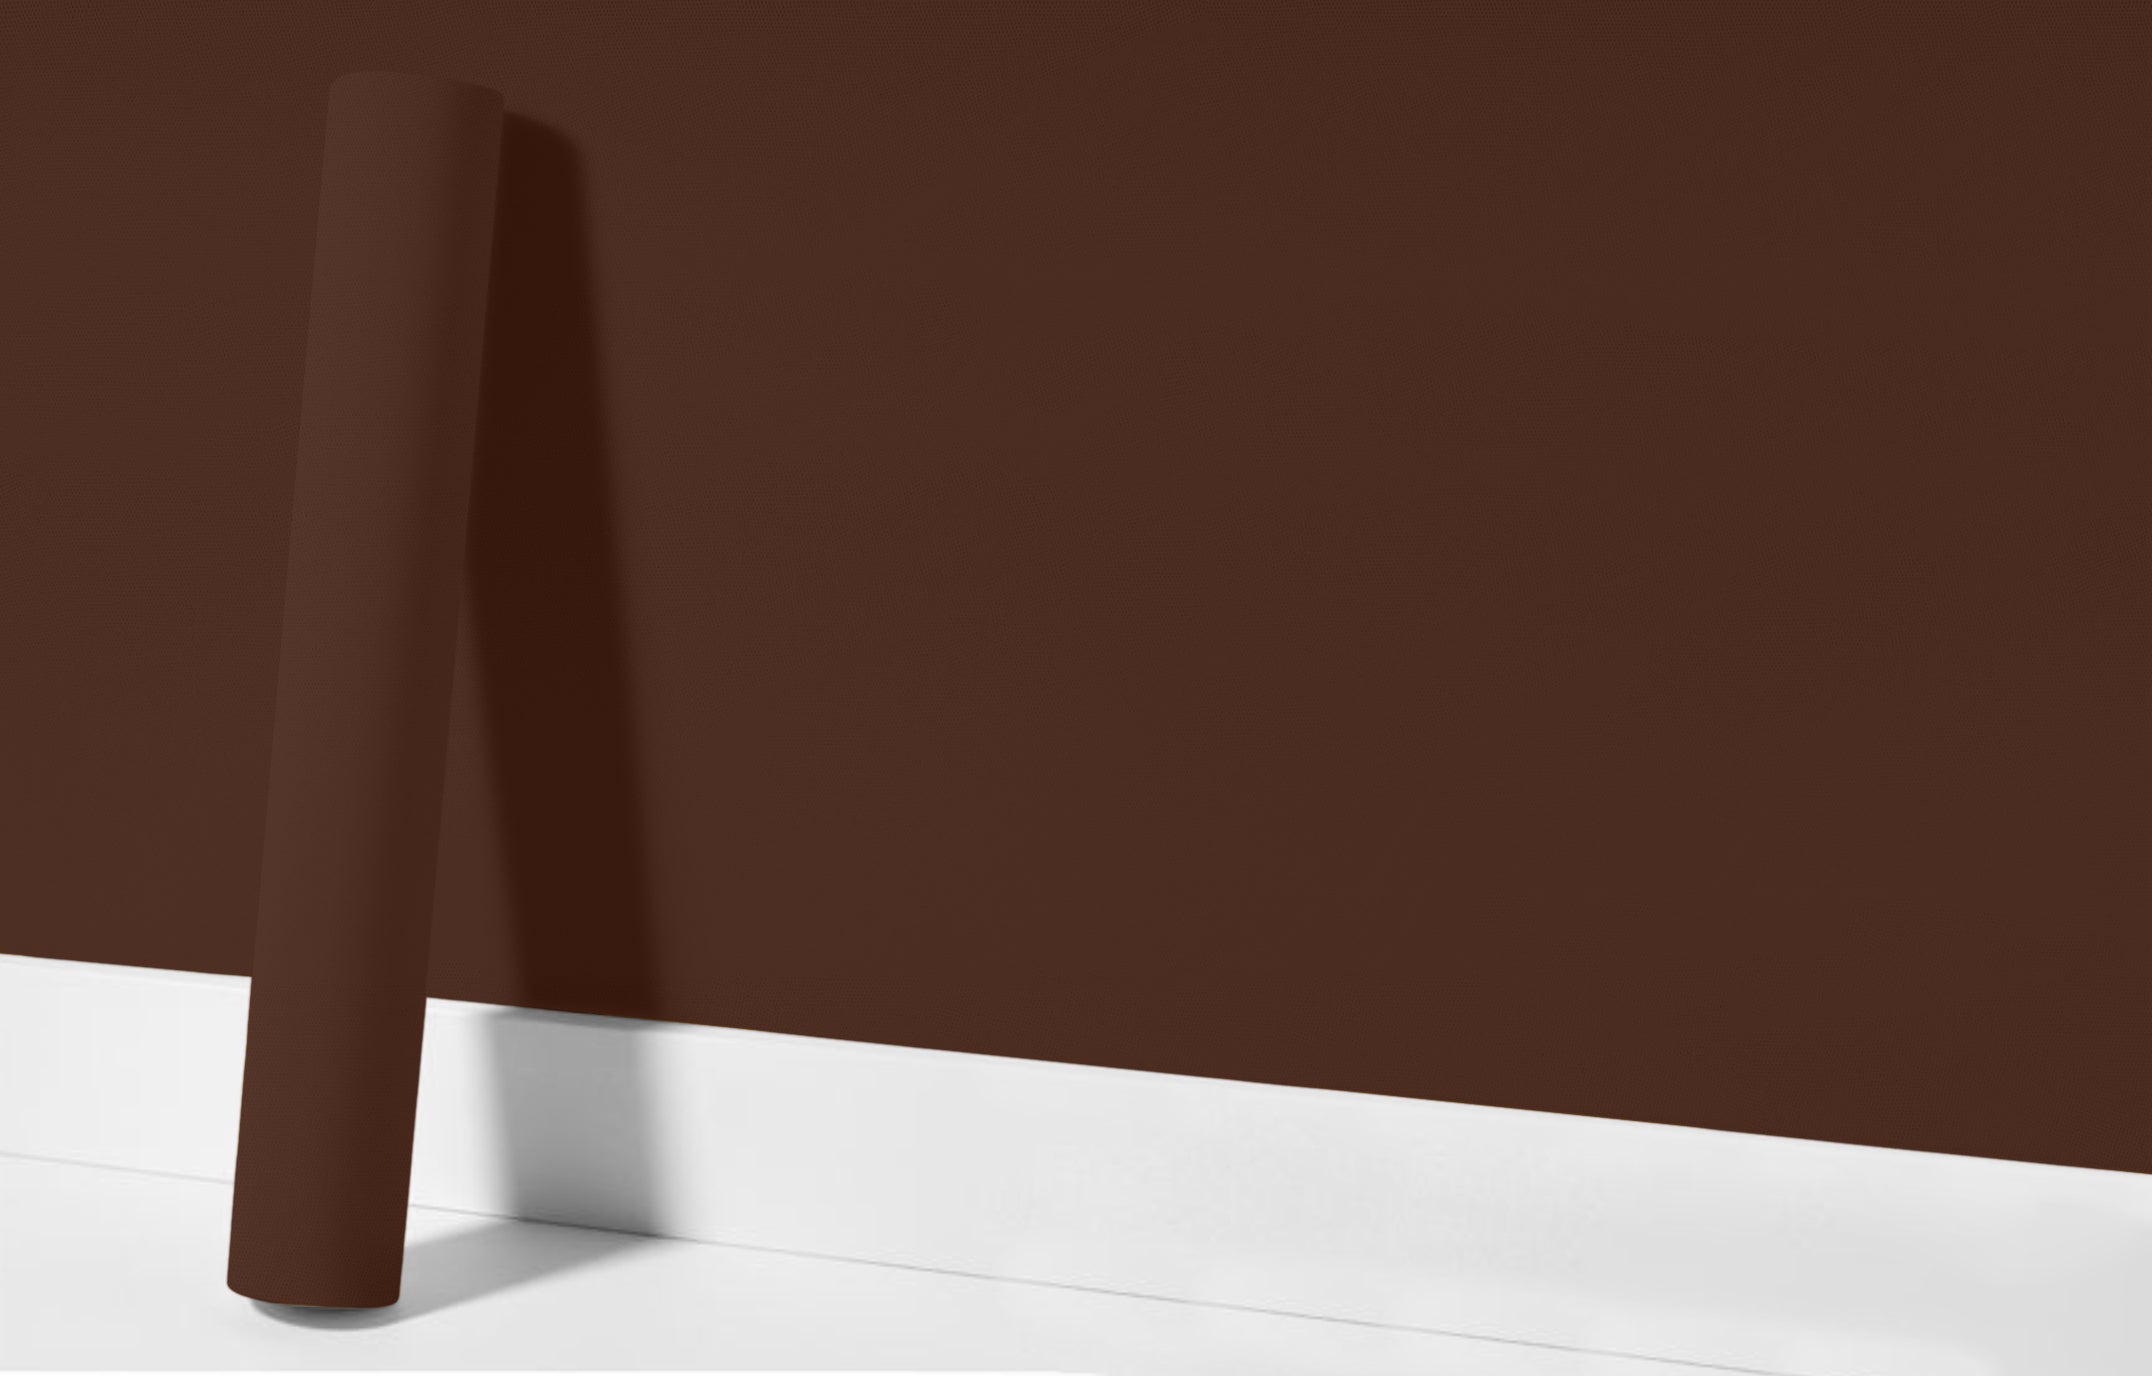 Peel & Stick Removable Re-usable Paint - Color RAL 8016 Mahogany Brown - offRAL™ - RALRAW LLC, USA